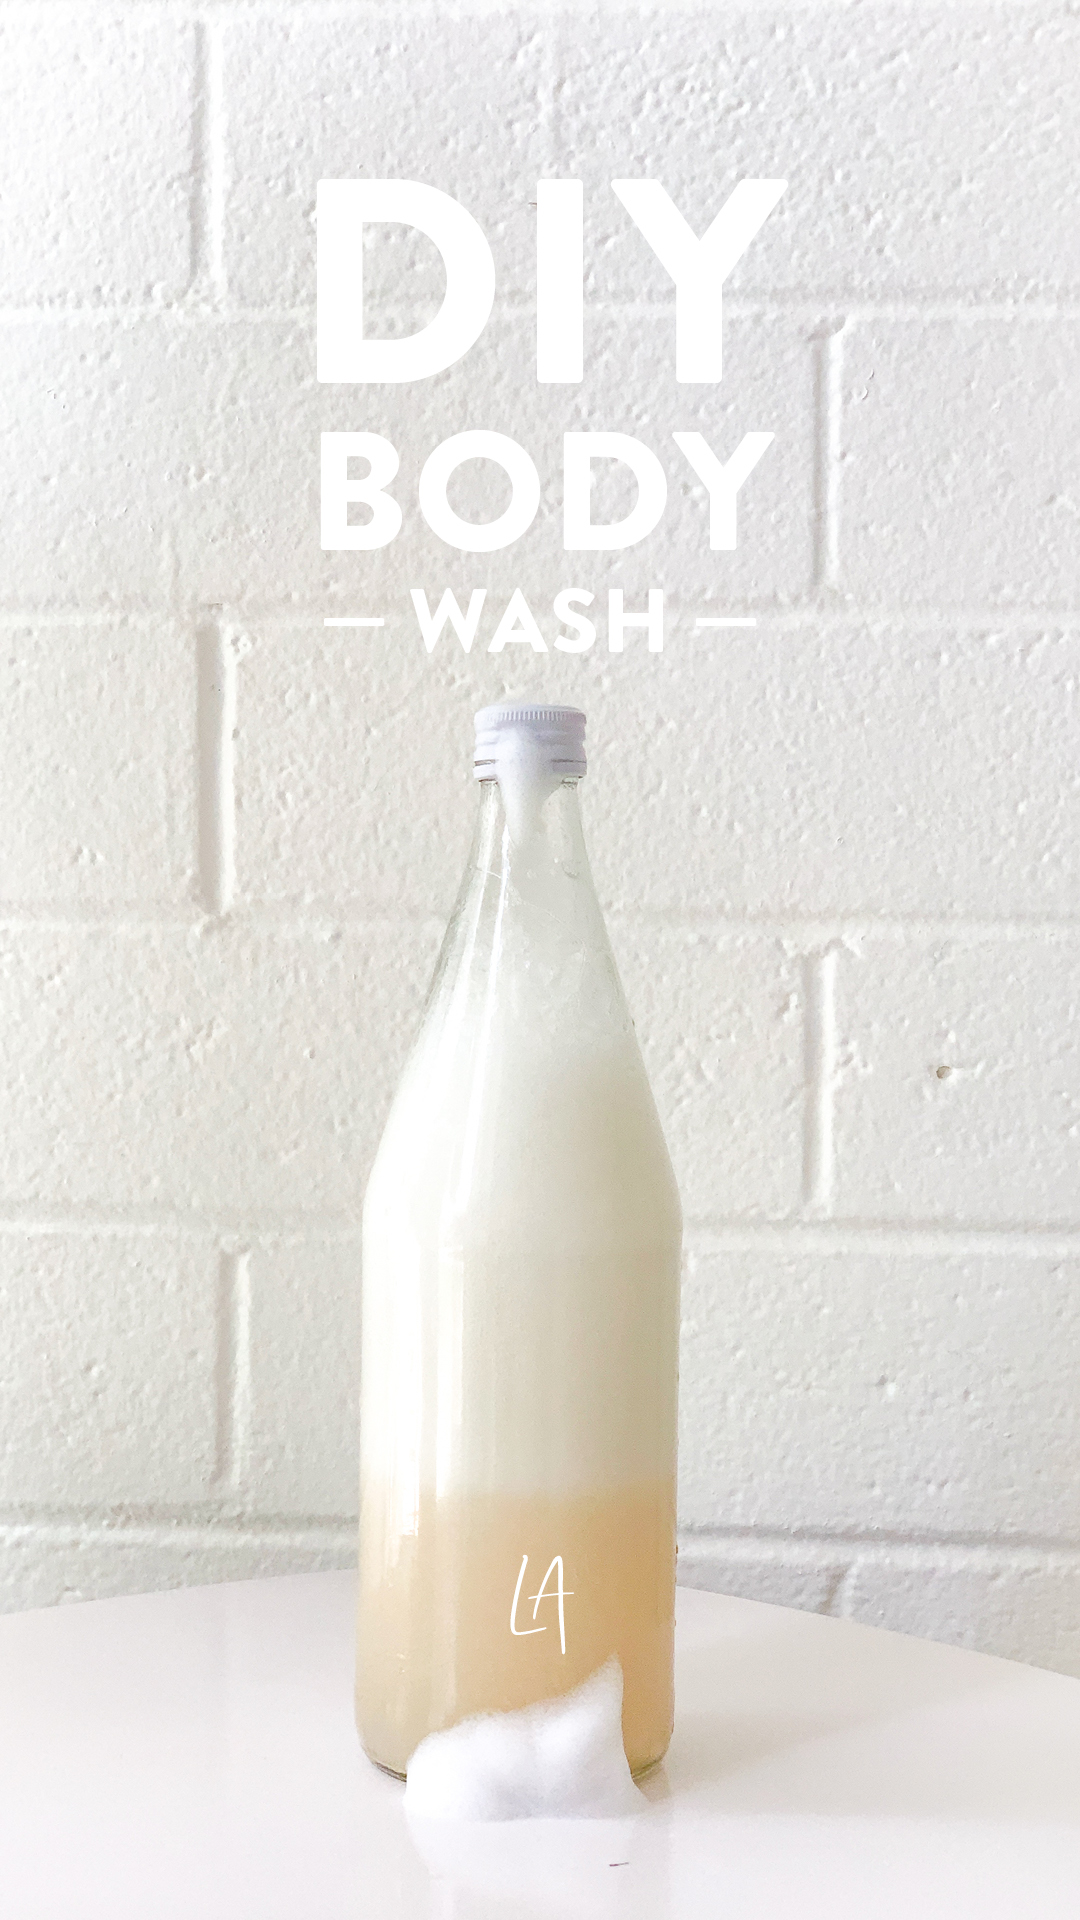 Make your own body wash at home